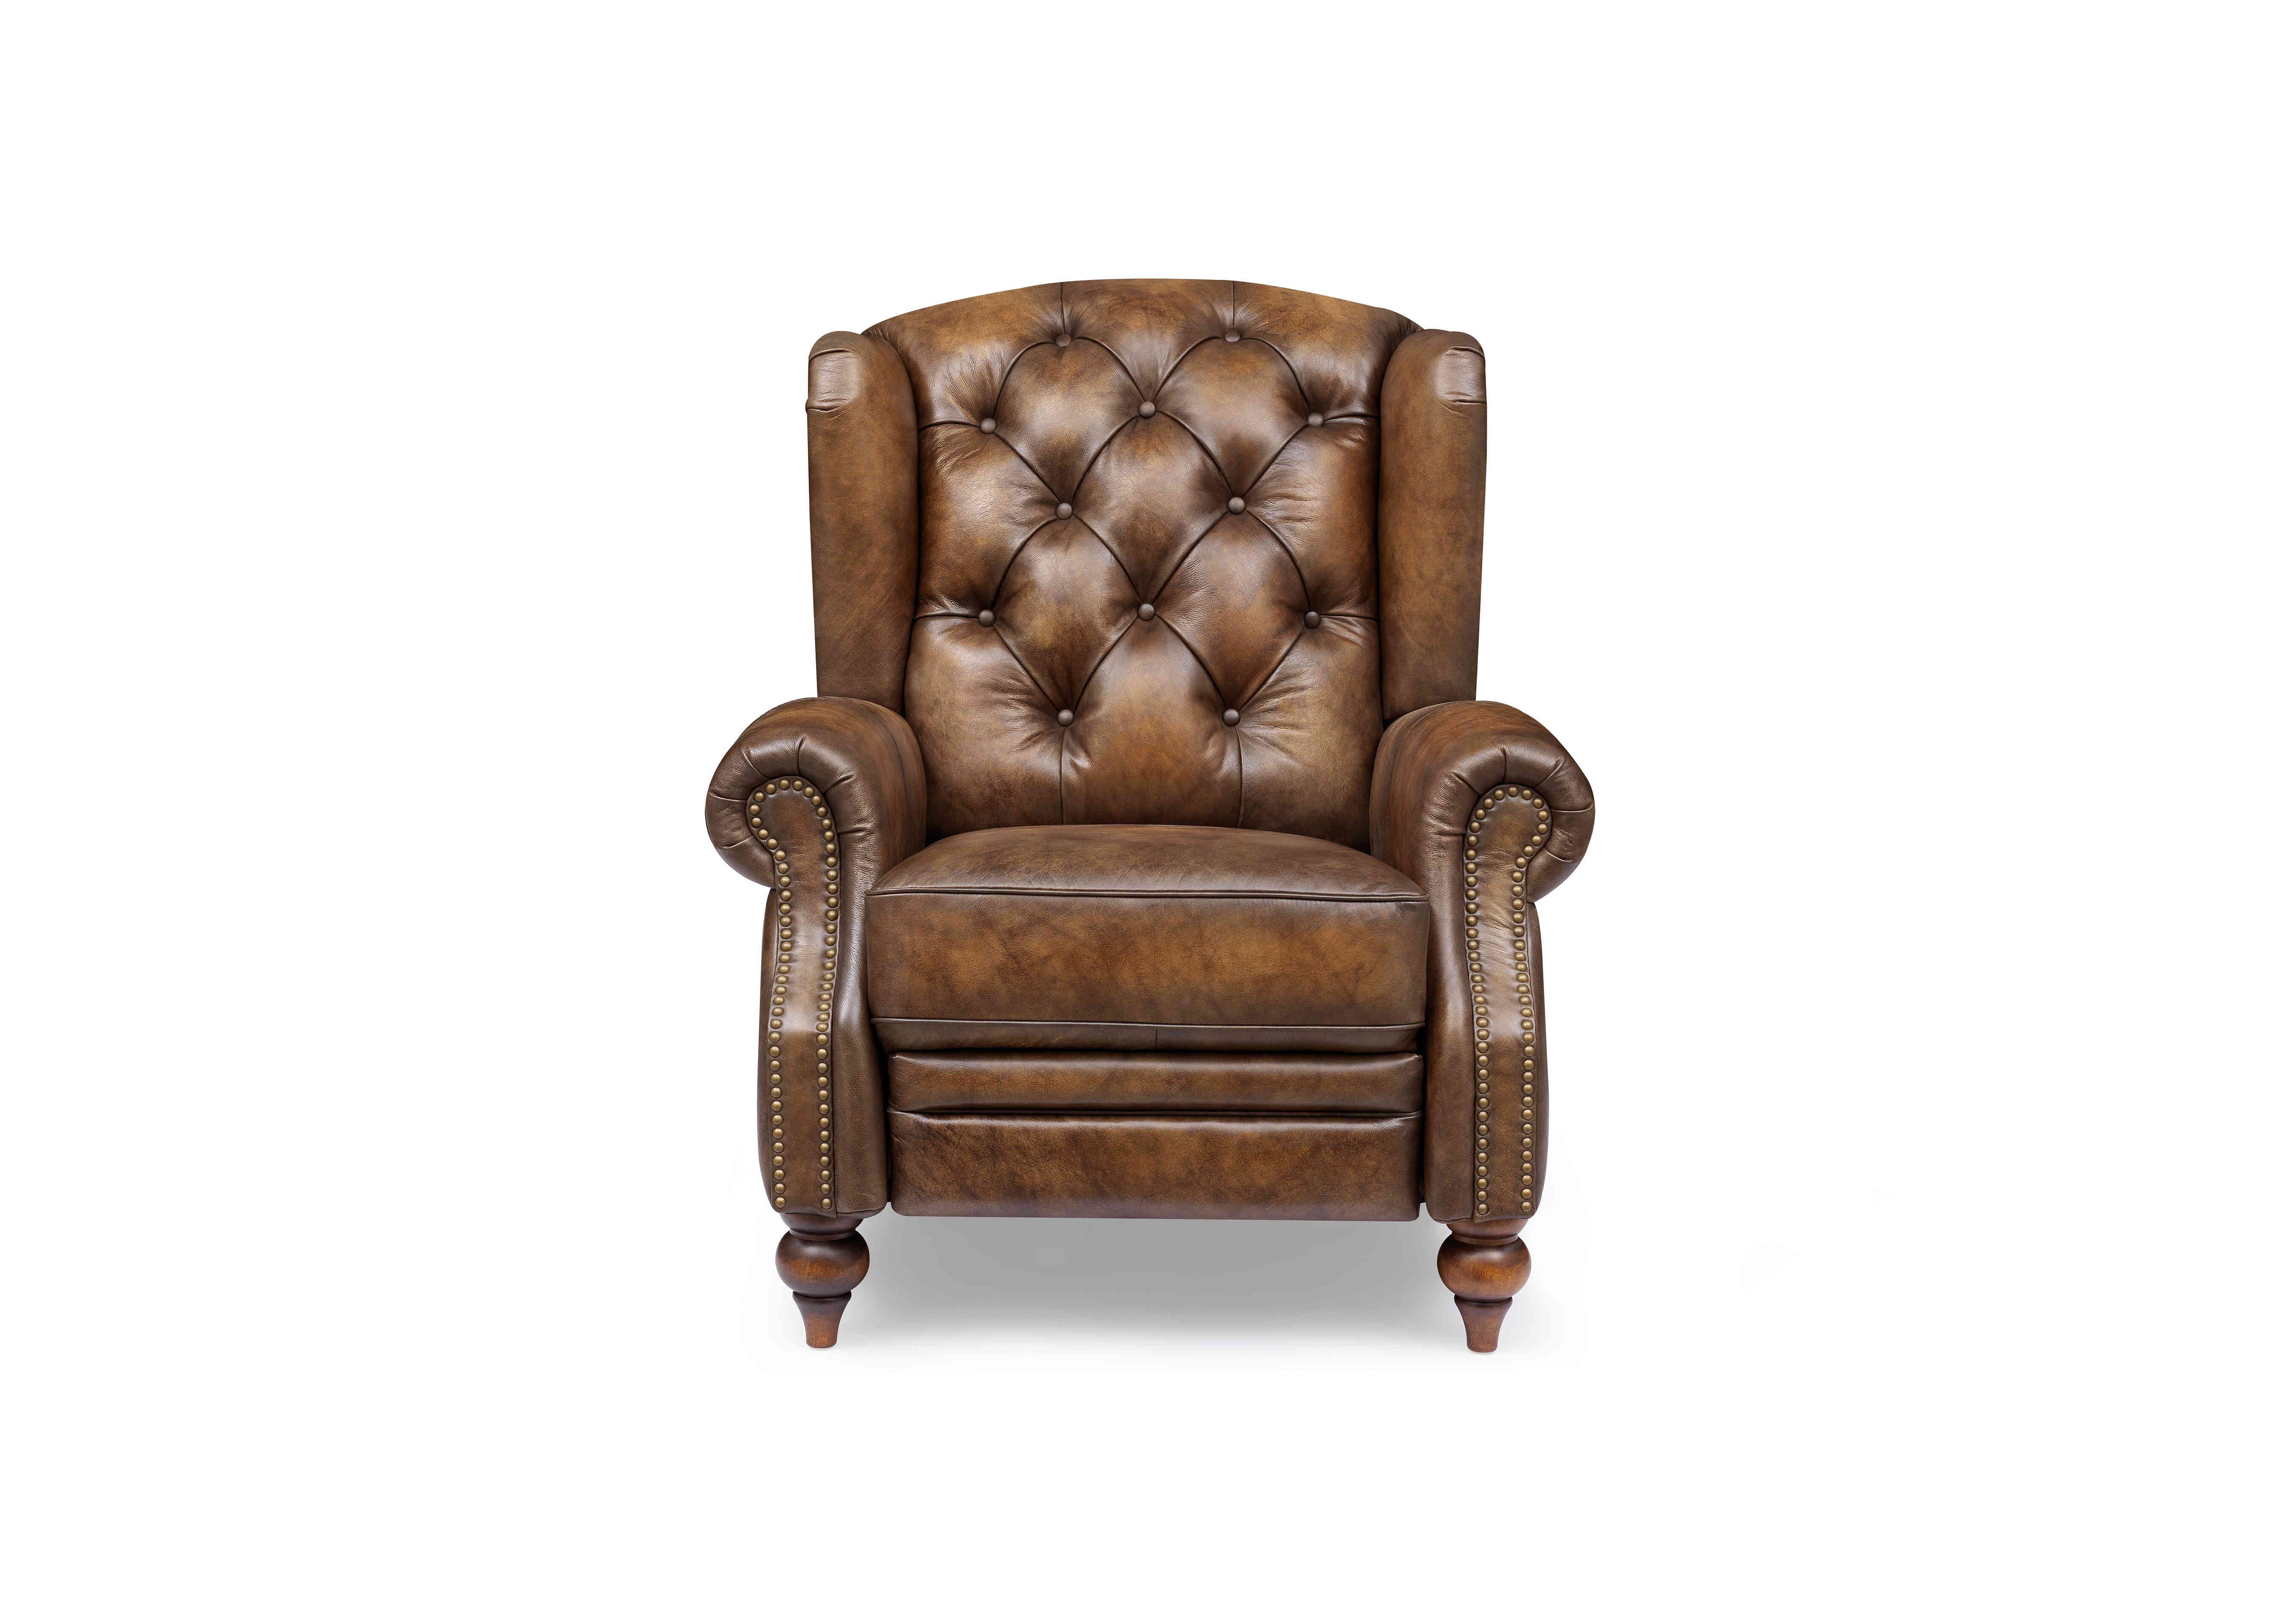 Shackleton Leather Power Recliner Wing Chair in X3y1-1981ls Saddle on Furniture Village